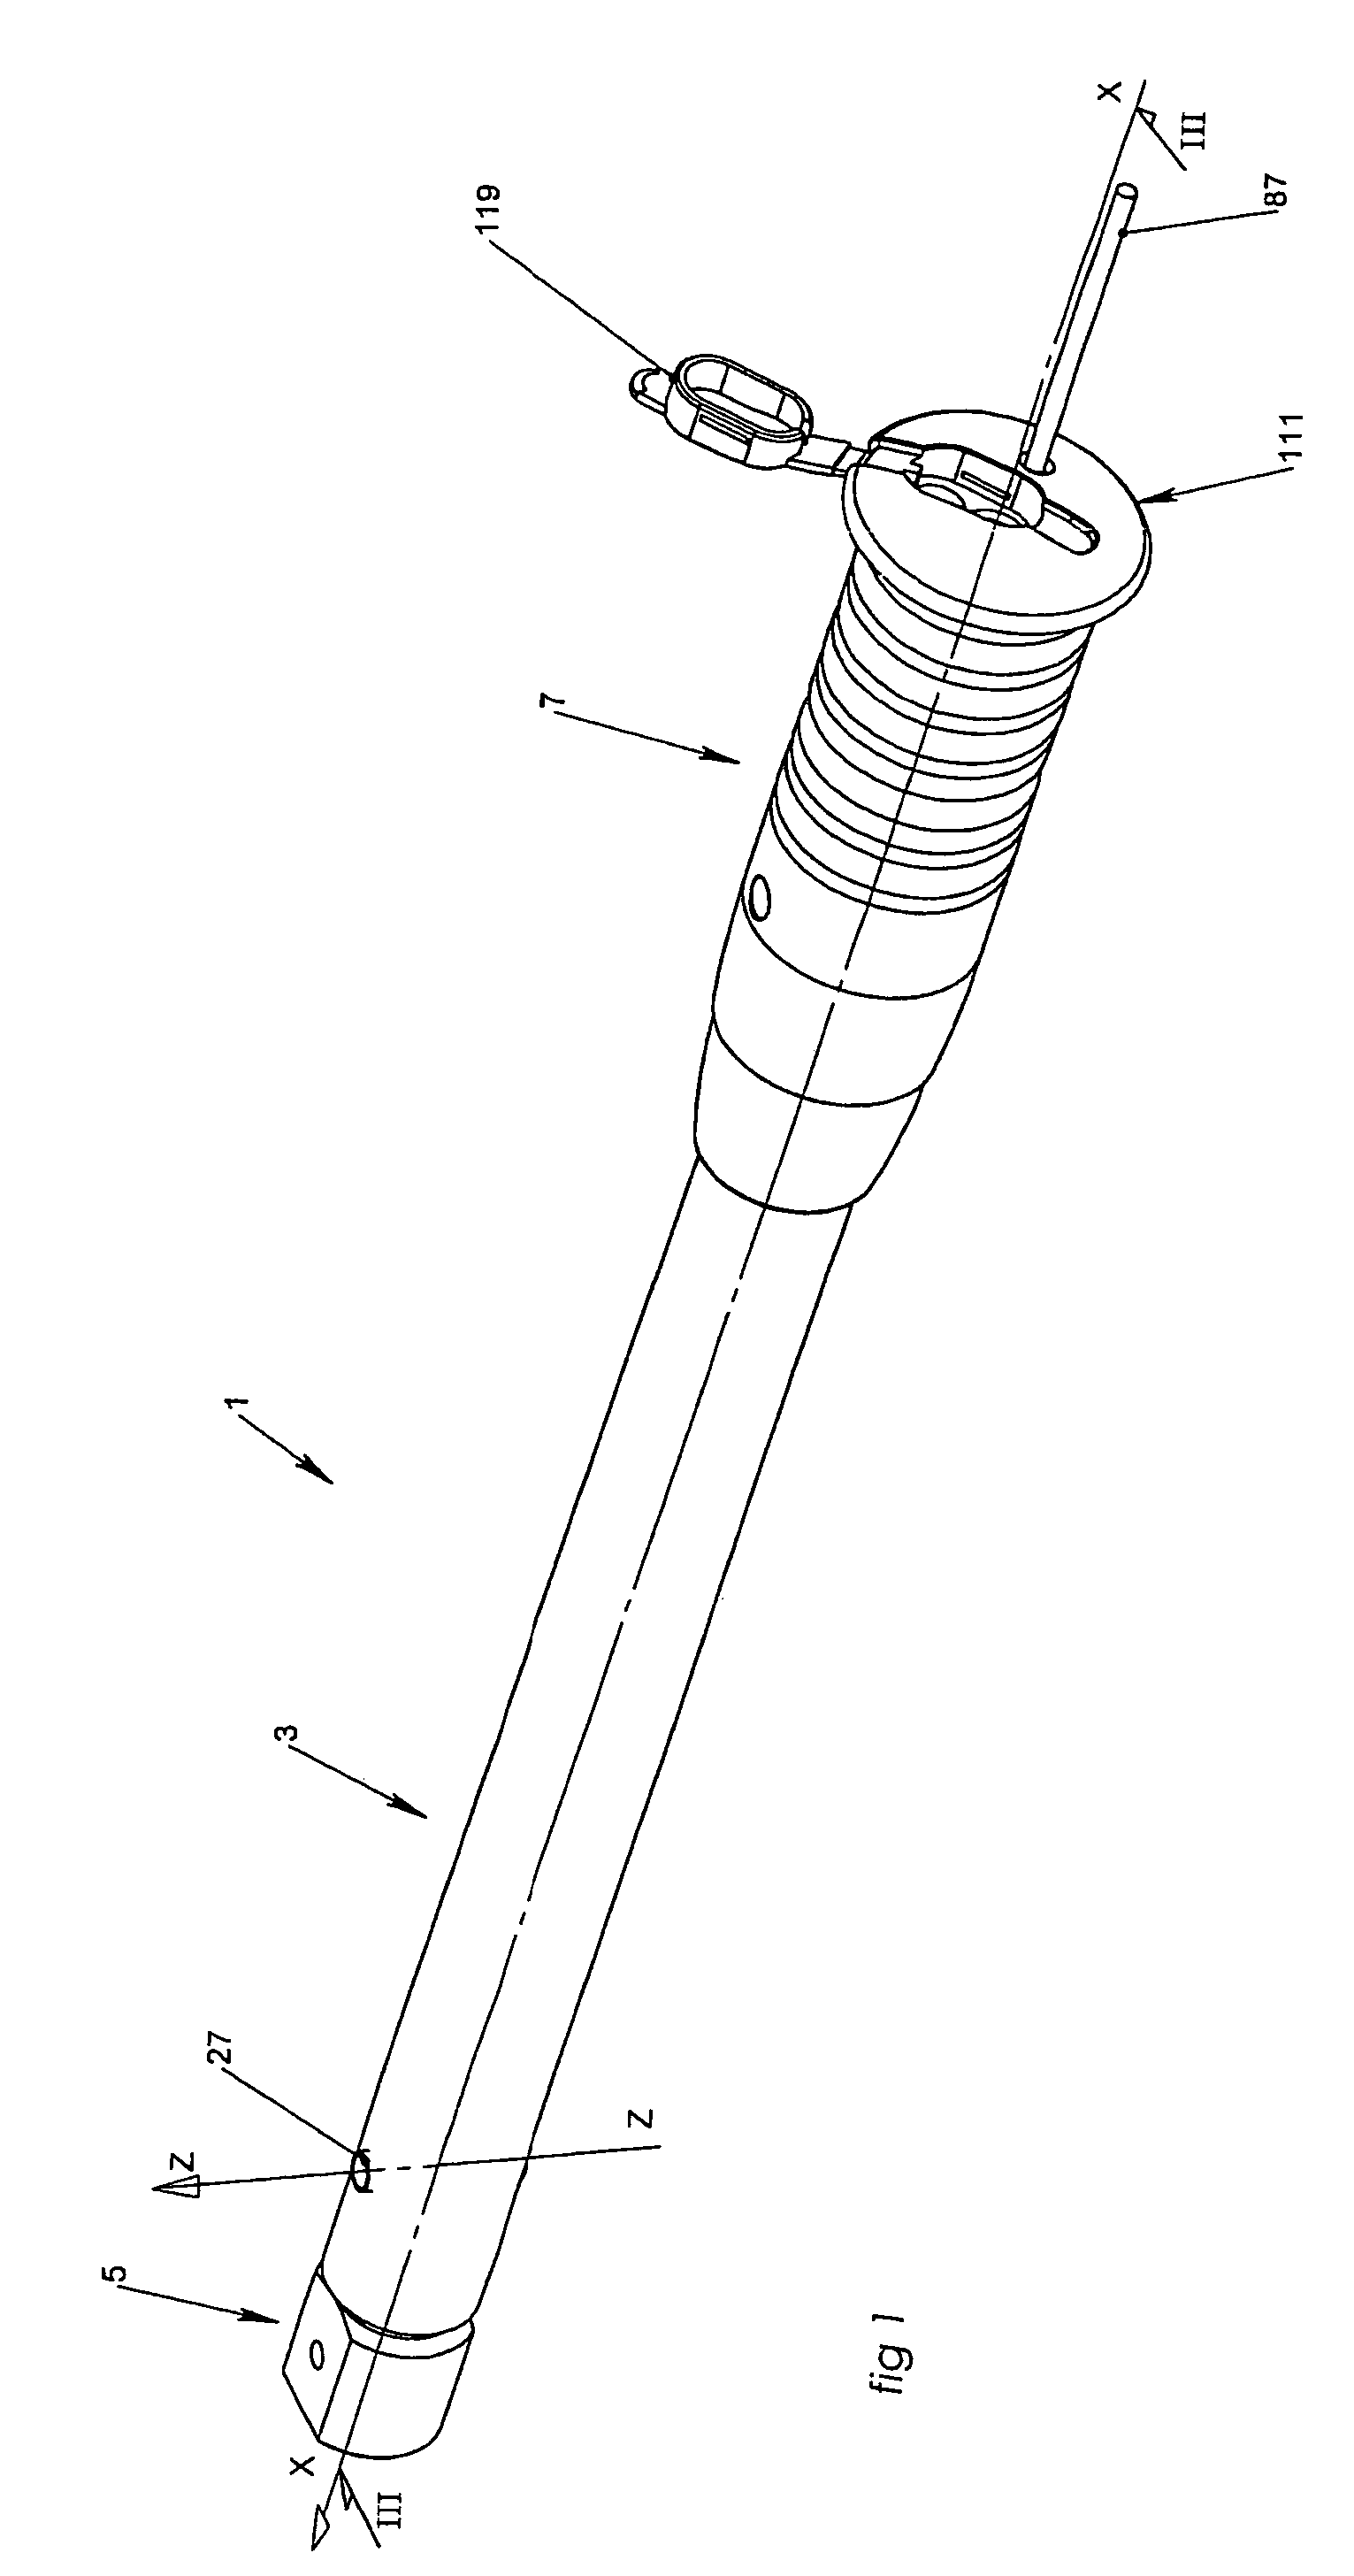 Dynamometer tool, in particular a torque wrench, and a method of detecting a break in mechanical equilibrium during tightening to torque